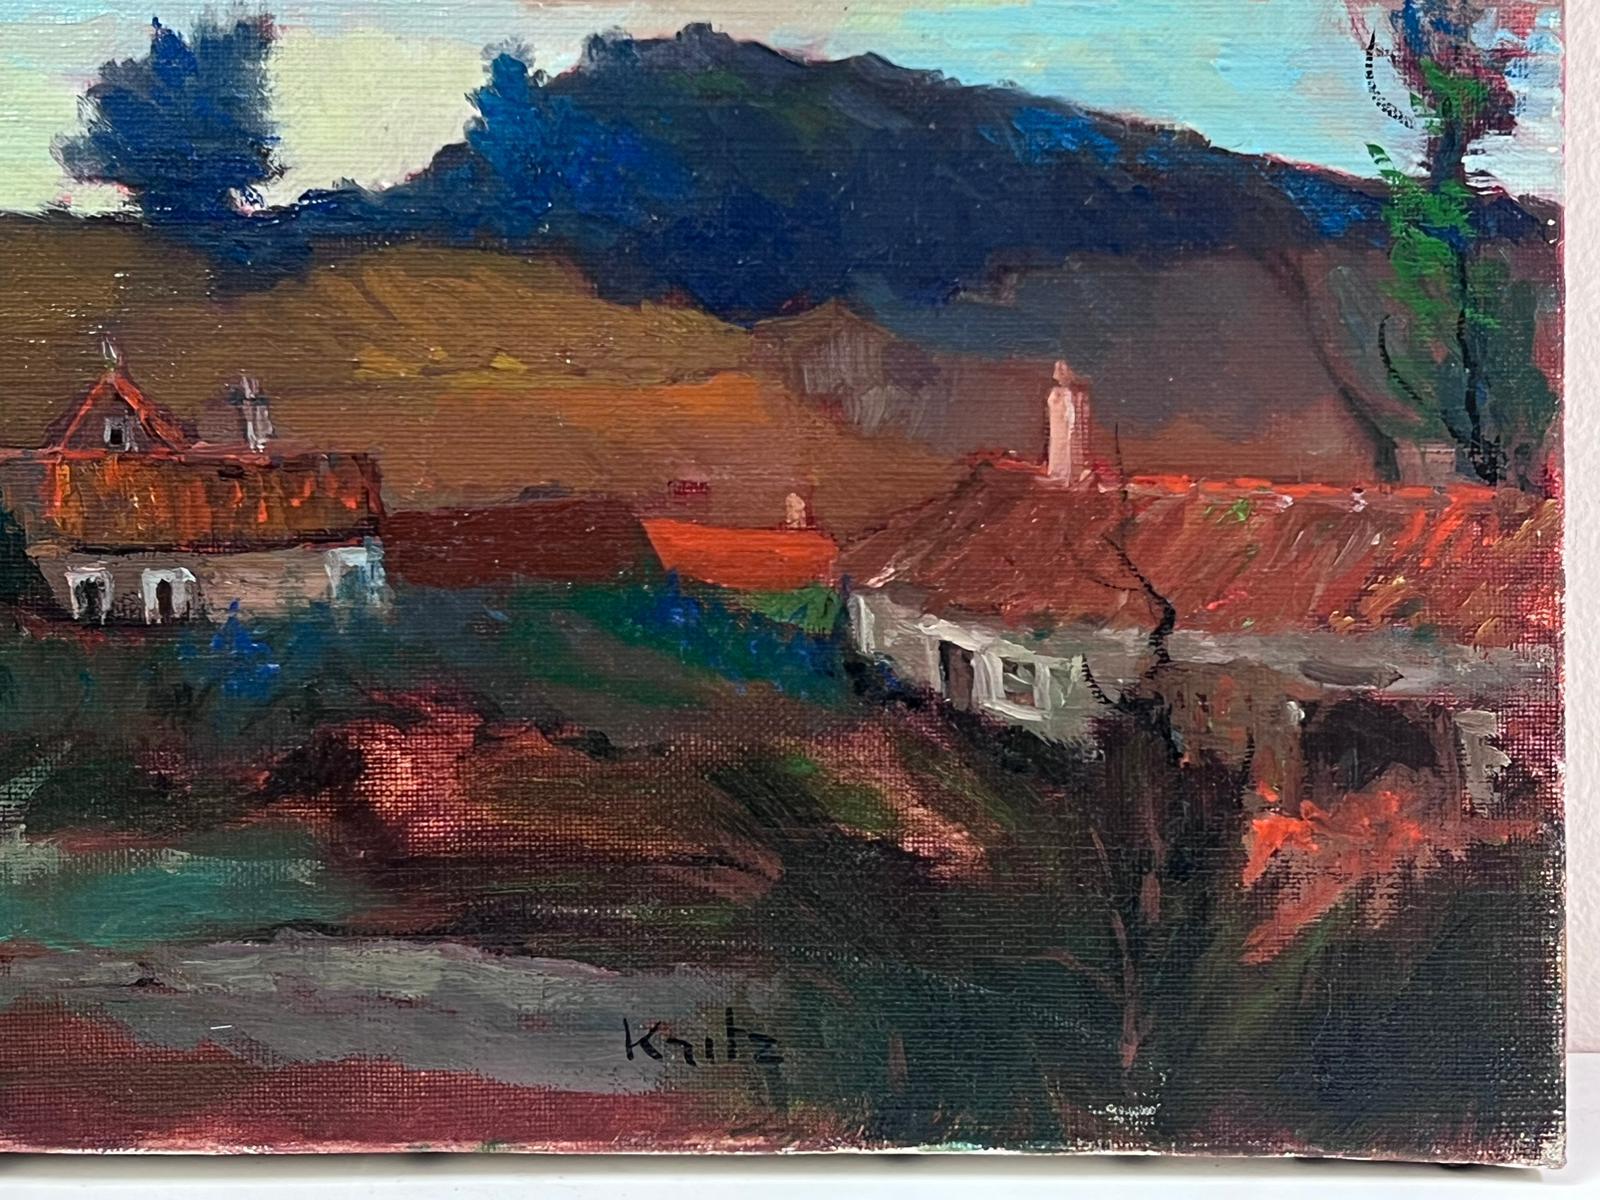 The French Landscape 
by Michel Kritz (French 1925-1994)
signed oil on canvas, unframed
canvas: 15 x 18 inches
provenance: private collection, France
condition: very good and sound condition  